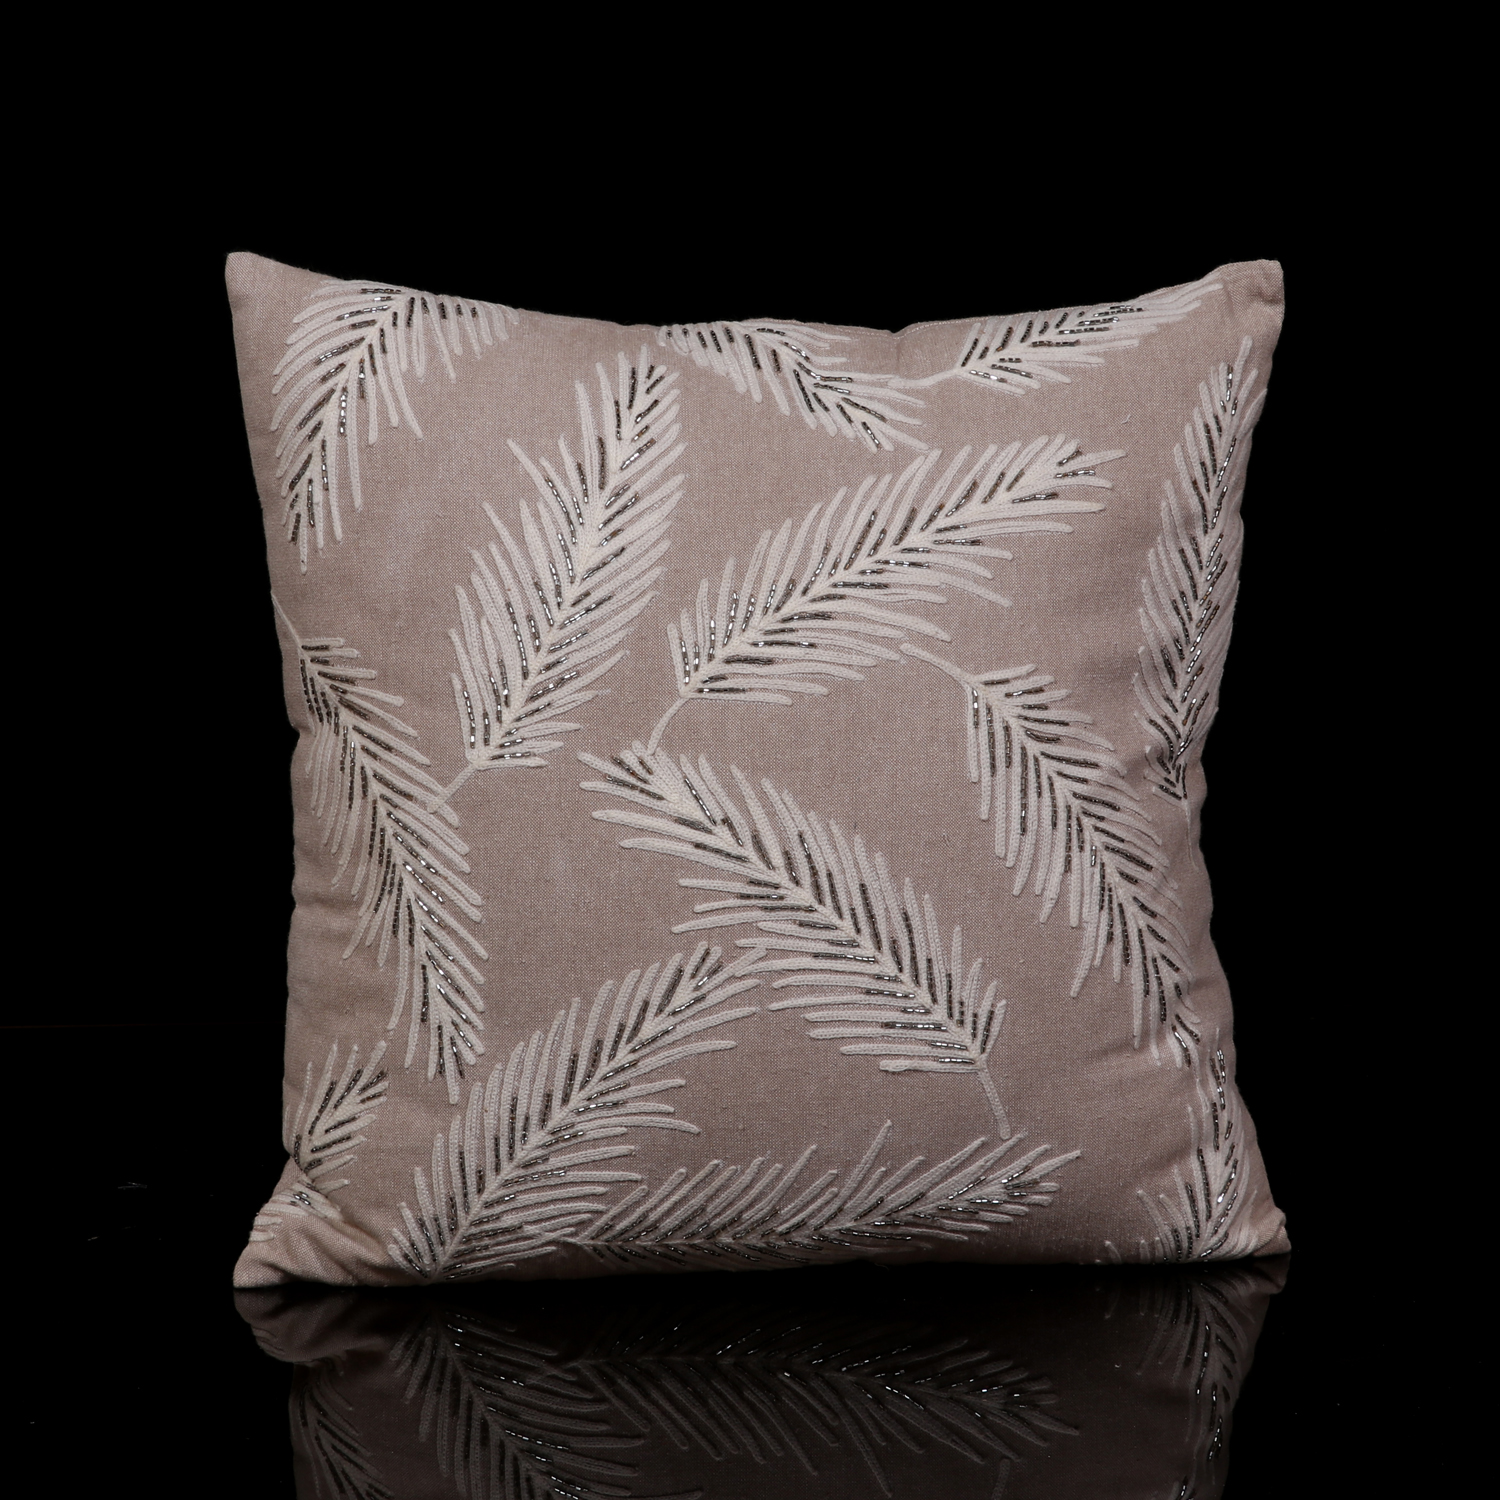 EMBROIDERED SCATTERED FEATHERS DESIGN PILLOW EMBELLISHED WITH BEADS